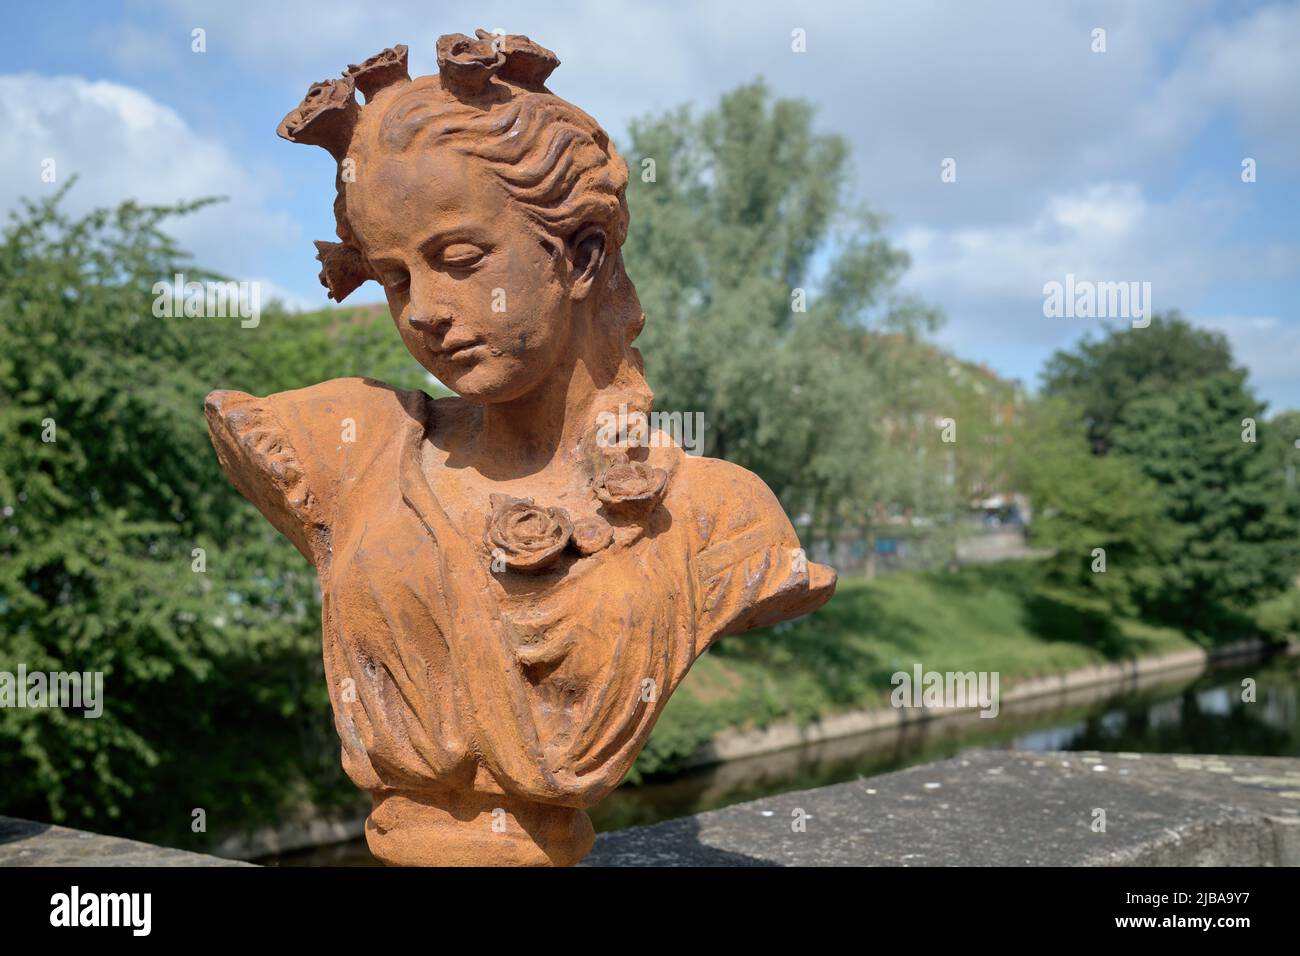 Bust of woman with the view of the banks of the Leine River in the background (No. 2) Stock Photo